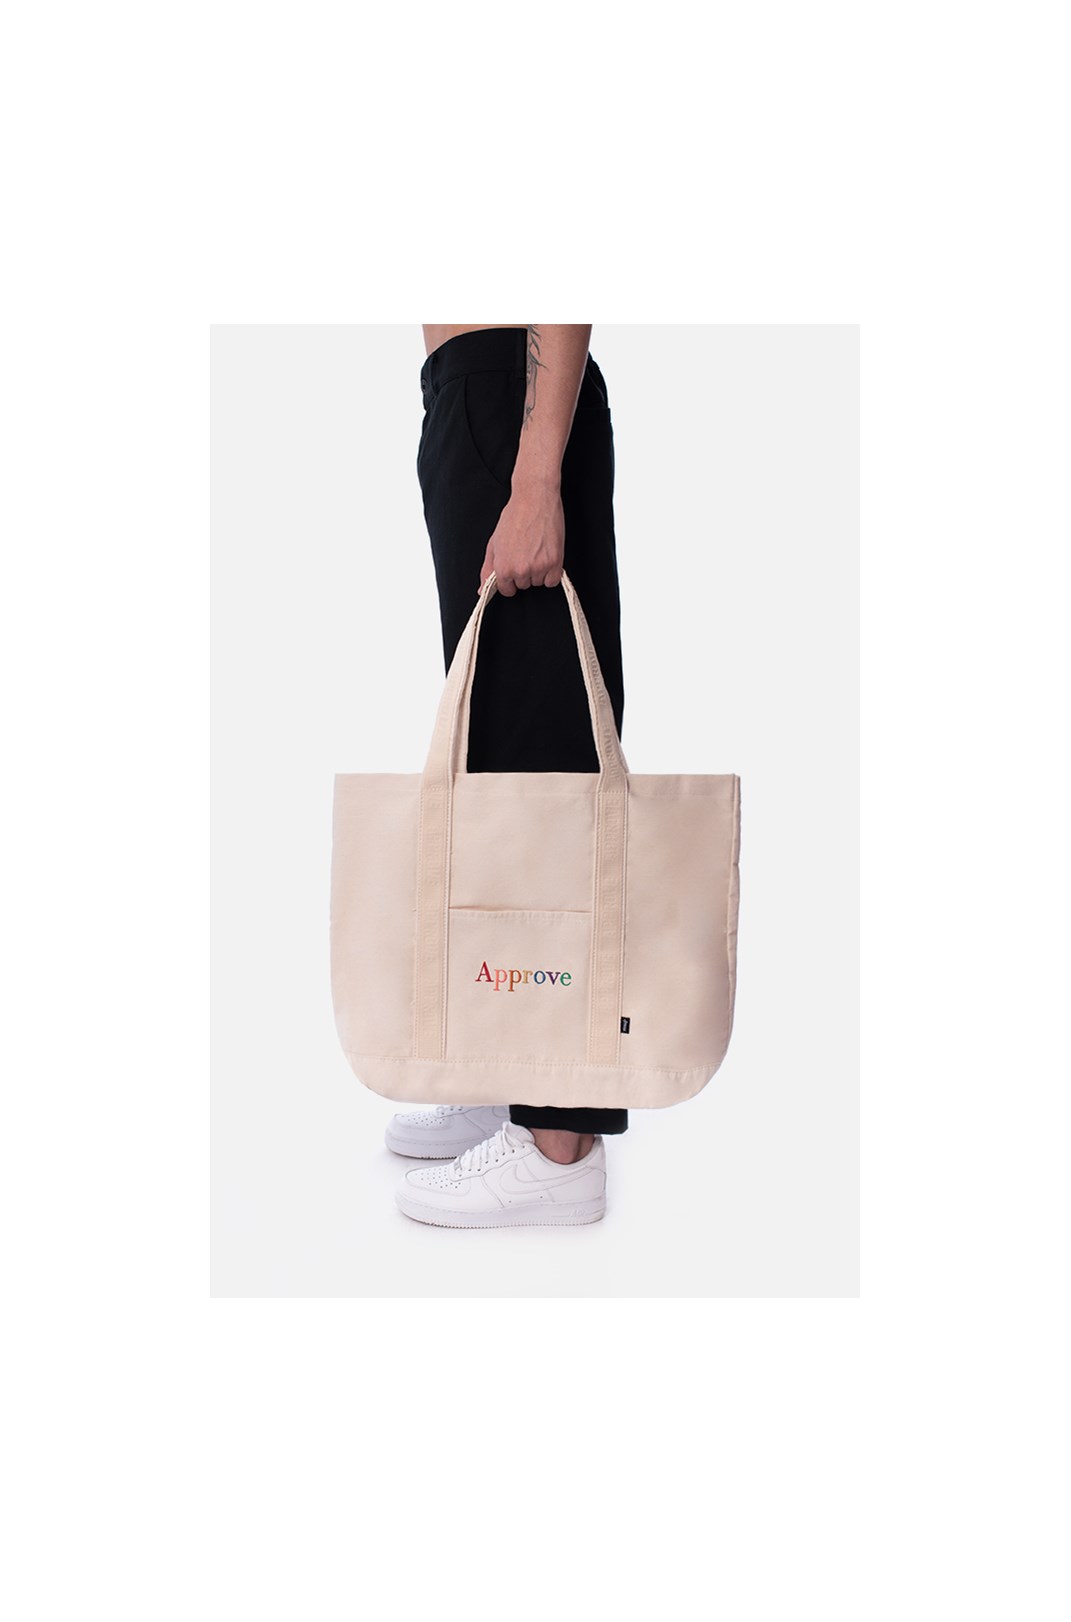 Ecobag Approve Rainbow Off White